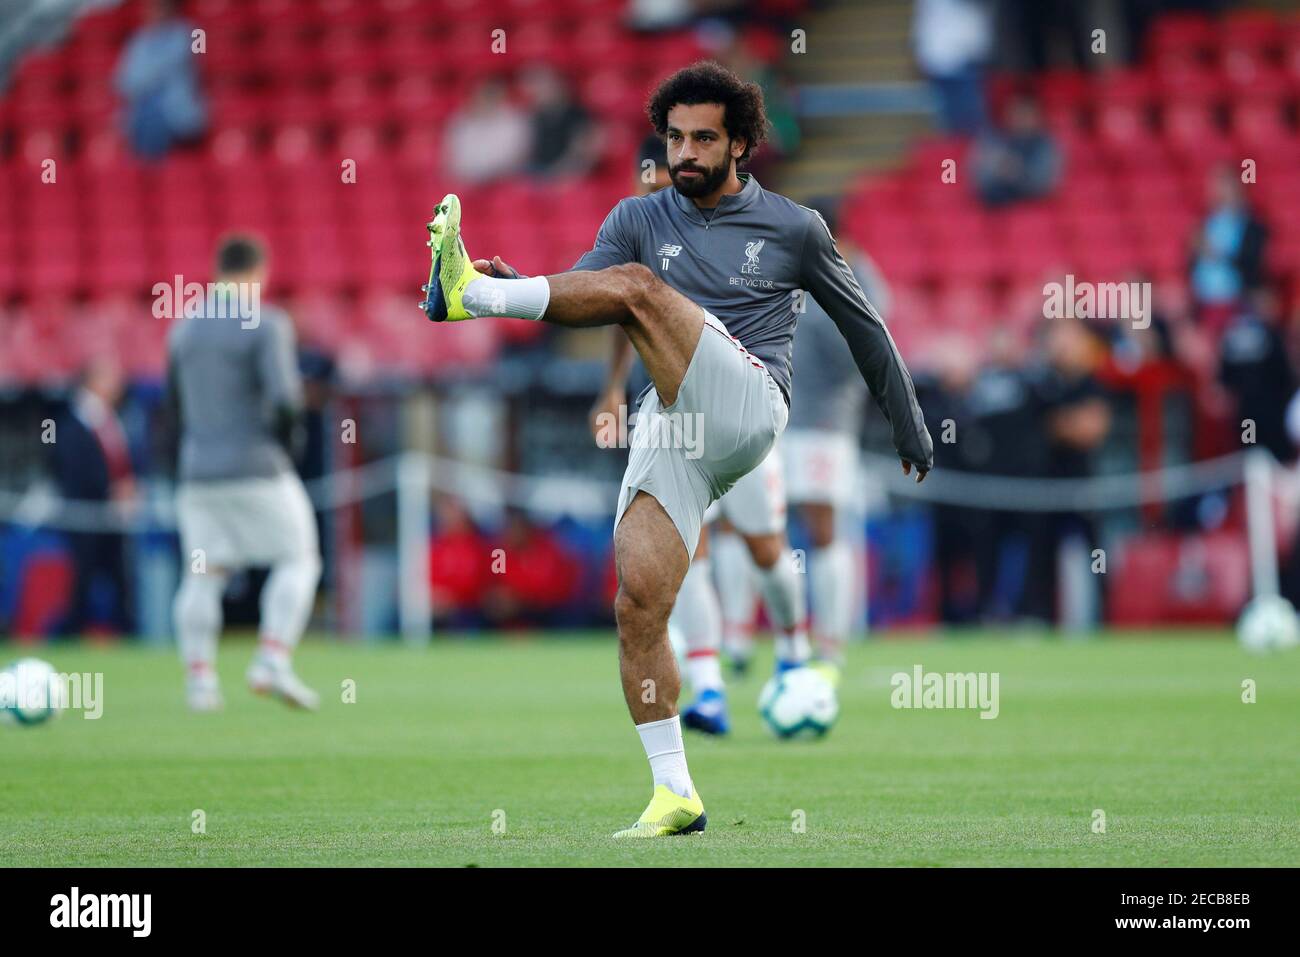 Soccer Football - Premier League - Crystal Palace v Liverpool - Selhurst Park, London, Britain - August 20, 2018  Liverpool's Mohamed Salah during the warm up       REUTERS/Eddie Keogh  EDITORIAL USE ONLY. No use with unauthorized audio, video, data, fixture lists, club/league logos or 'live' services. Online in-match use limited to 75 images, no video emulation. No use in betting, games or single club/league/player publications.  Please contact your account representative for further details. Stock Photo